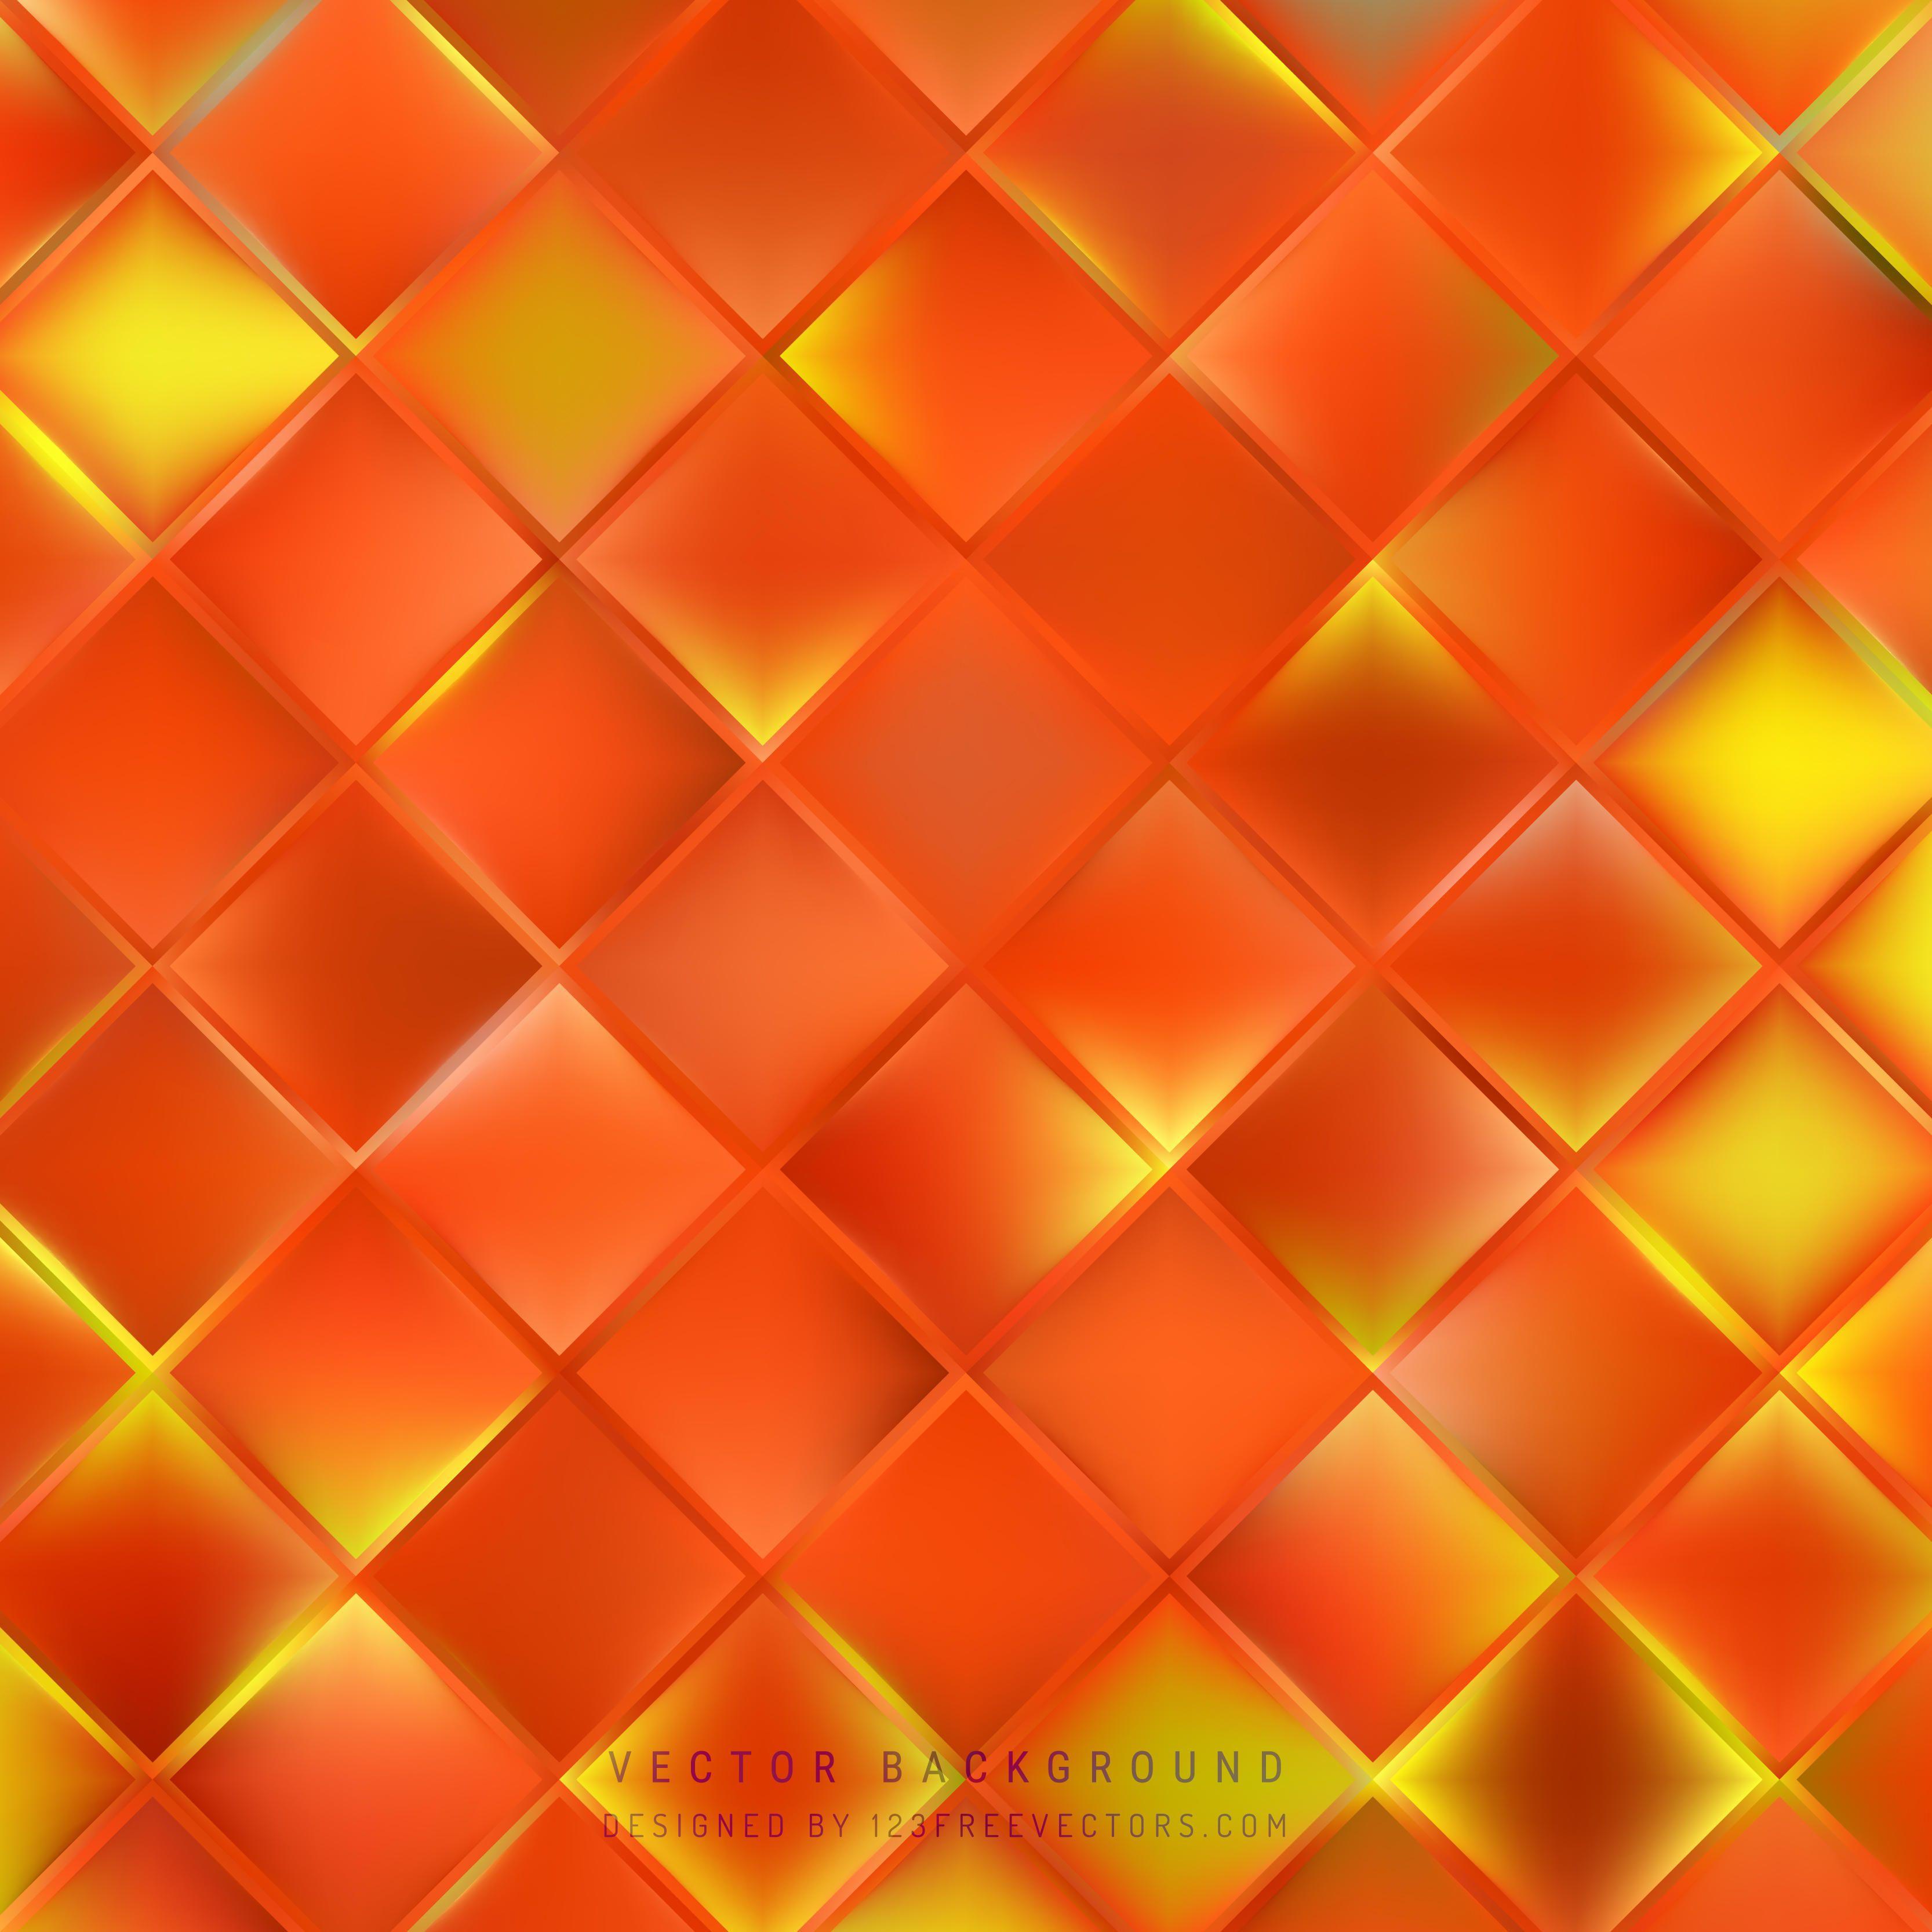 Abstract Cool Orange Square BackgroundFreevectors